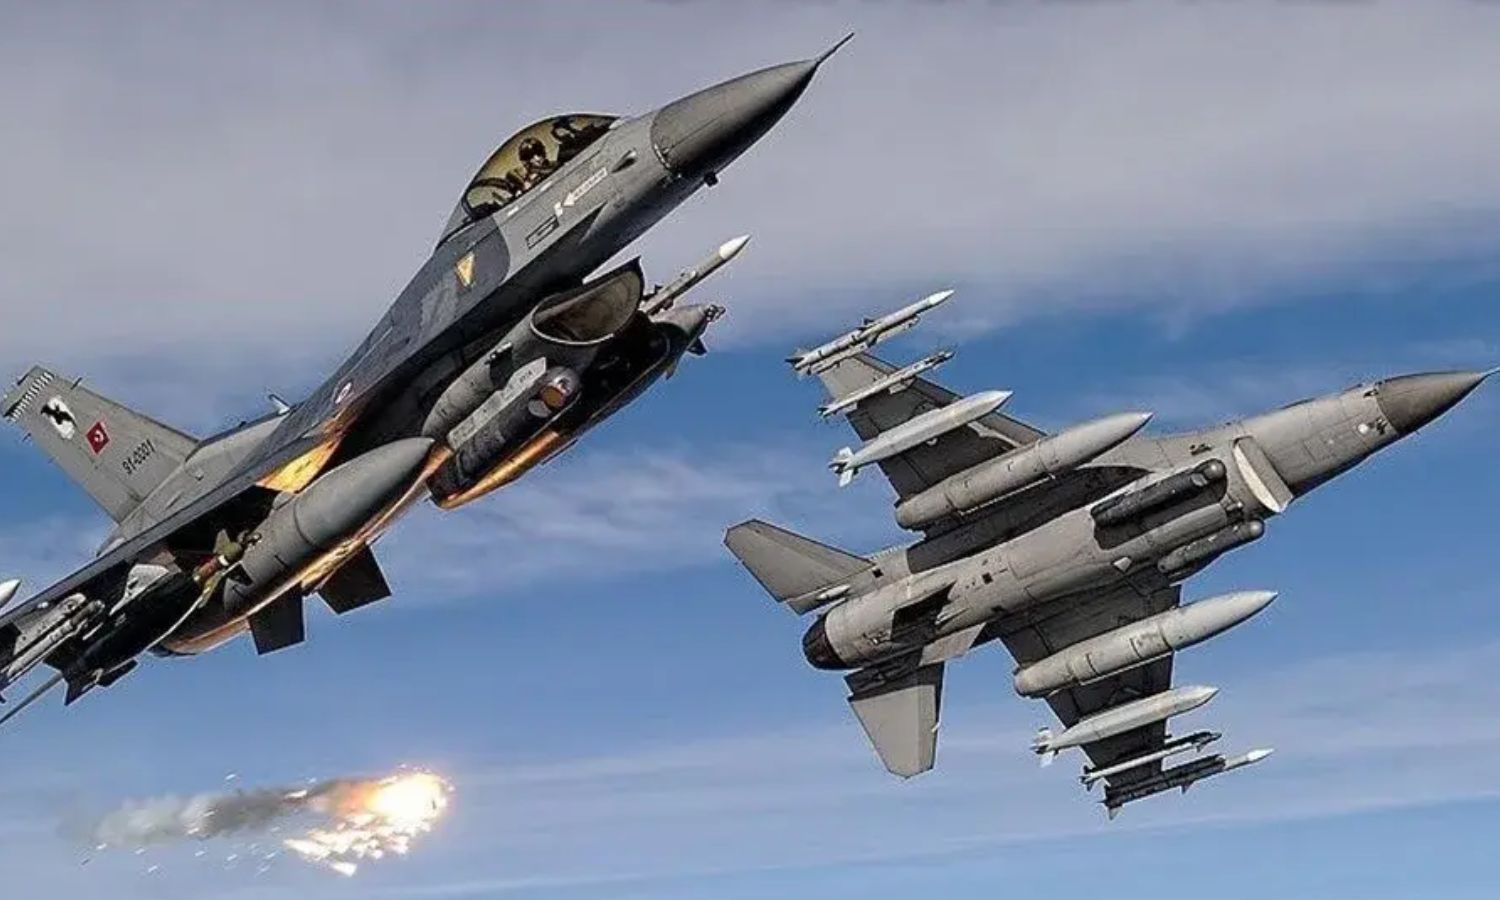 Turkey intensified its airstrikes over the past days on the SDF-controlled areas, destroying sections of the SDF-held Awda oil field east of al-Qahtaniyah town in northeastern Syria - (Turkish Ministry of Defense)